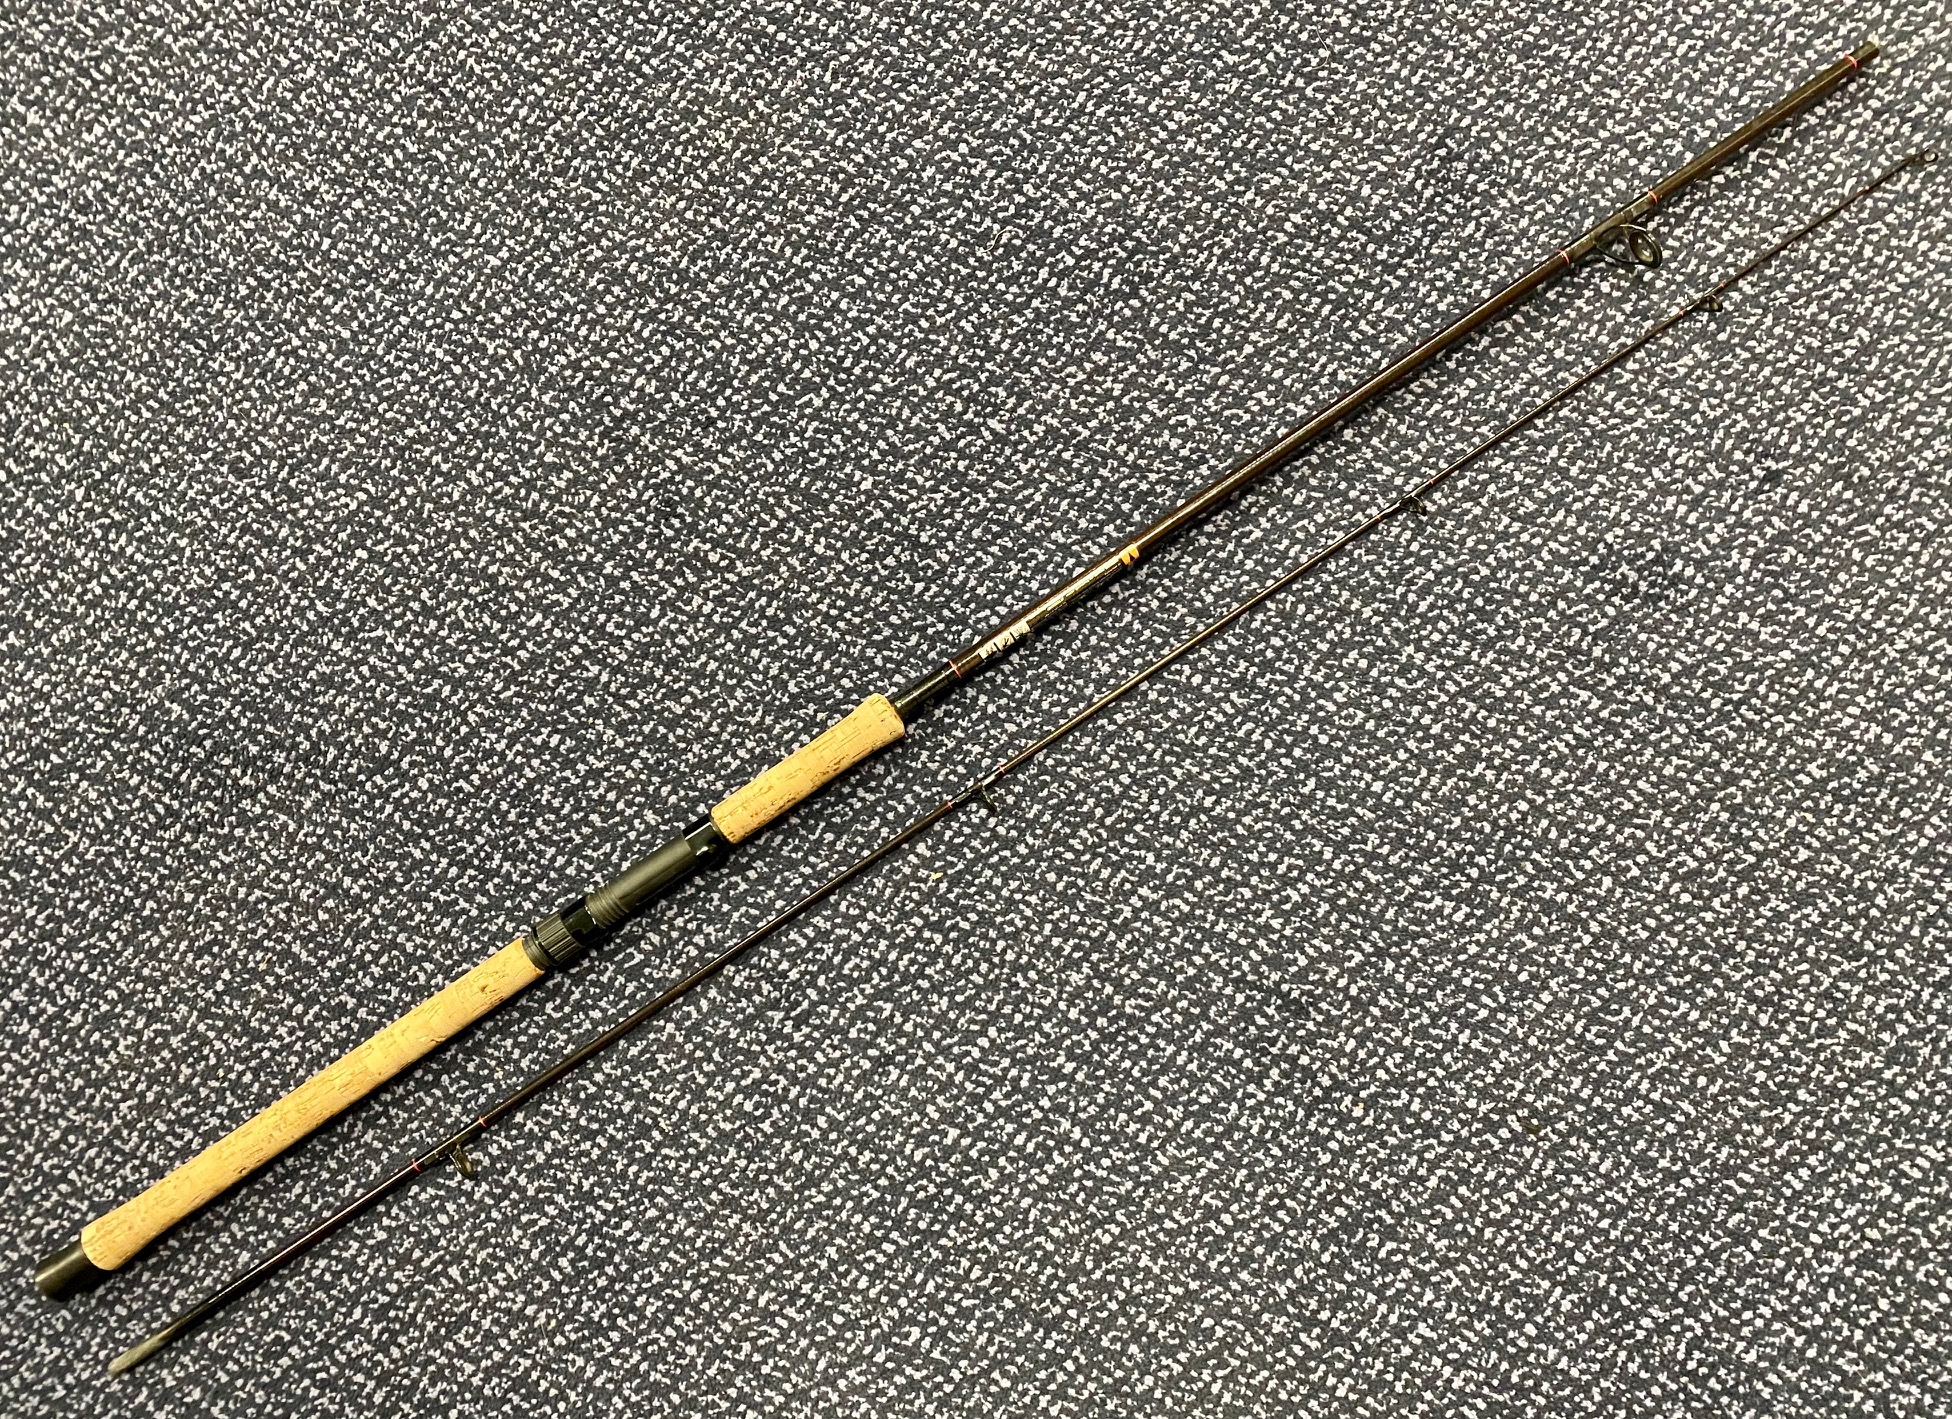 Preloved Daiwa Carbo Regal Spin 8ft 7-25g 2 piece made in Scotland